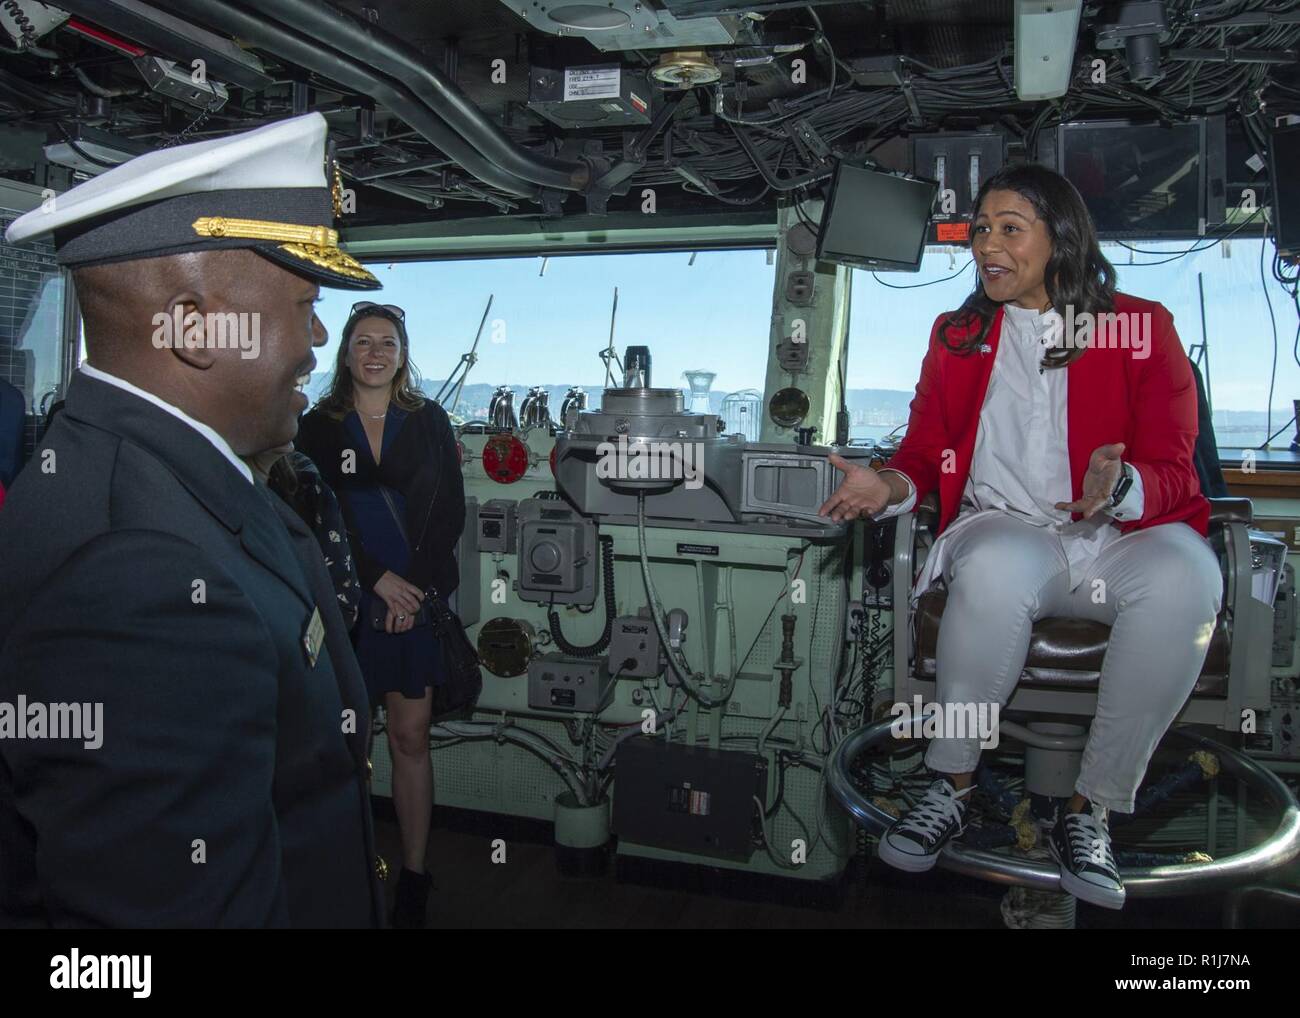 SAN FRANCISCO (Oct. 7, 2018) London Breed, right, mayor of San Francisco, speaks with Rear Adm. Cedric Pringle, commander, Expeditionary Strike Group (ESG) 3, during a tour of the amphibious assault ship USS Bonhomme Richard (LHD 6) as part of San Francisco Fleet Week 2018. San Francisco Fleet Week is an opportunity for the American public to meet their Navy, Marine Corps and Coast Guard teams and experience America’s sea services. During fleet week, service members participate in various community service events, showcase capabilities and equipment to the community, and enjoy the hospitality  Stock Photo